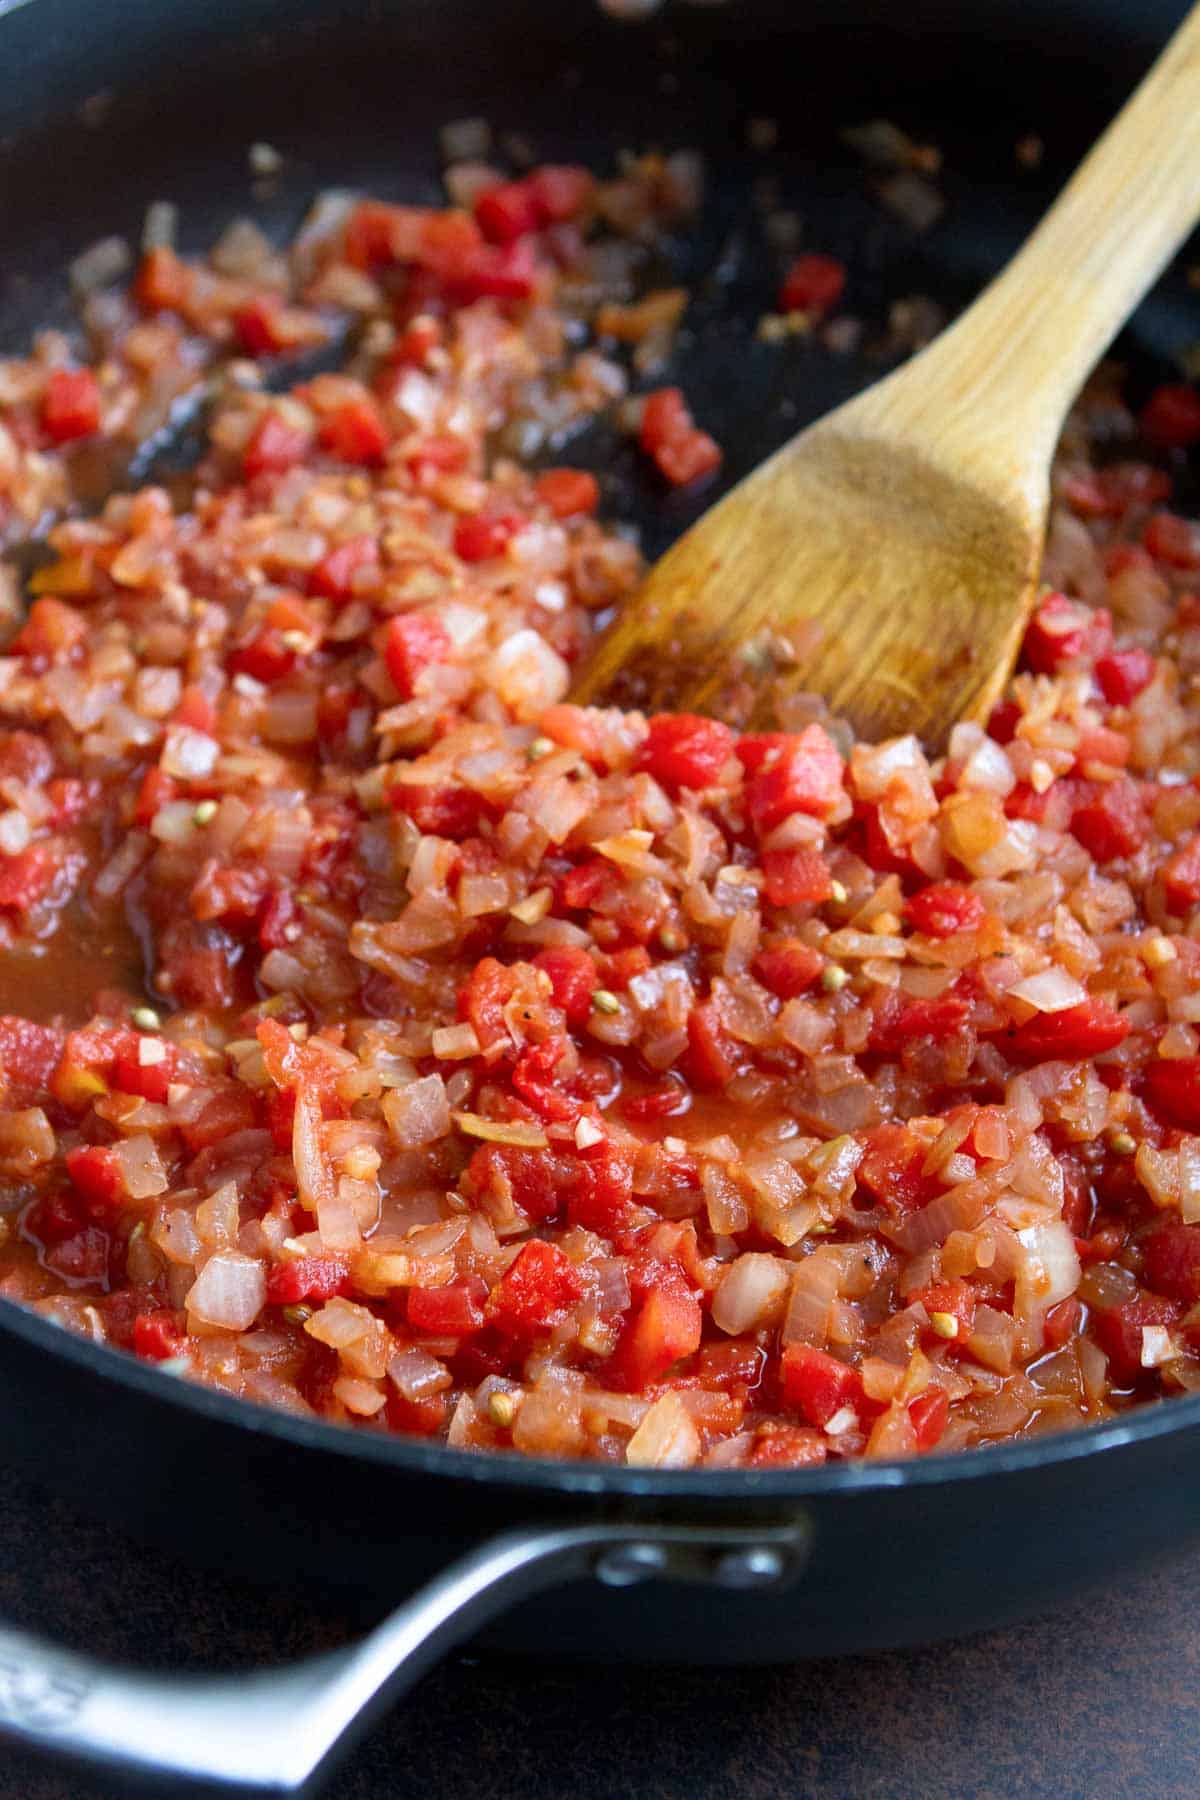 Cooked onions, spiced and diced tomatoes in a large skillet.